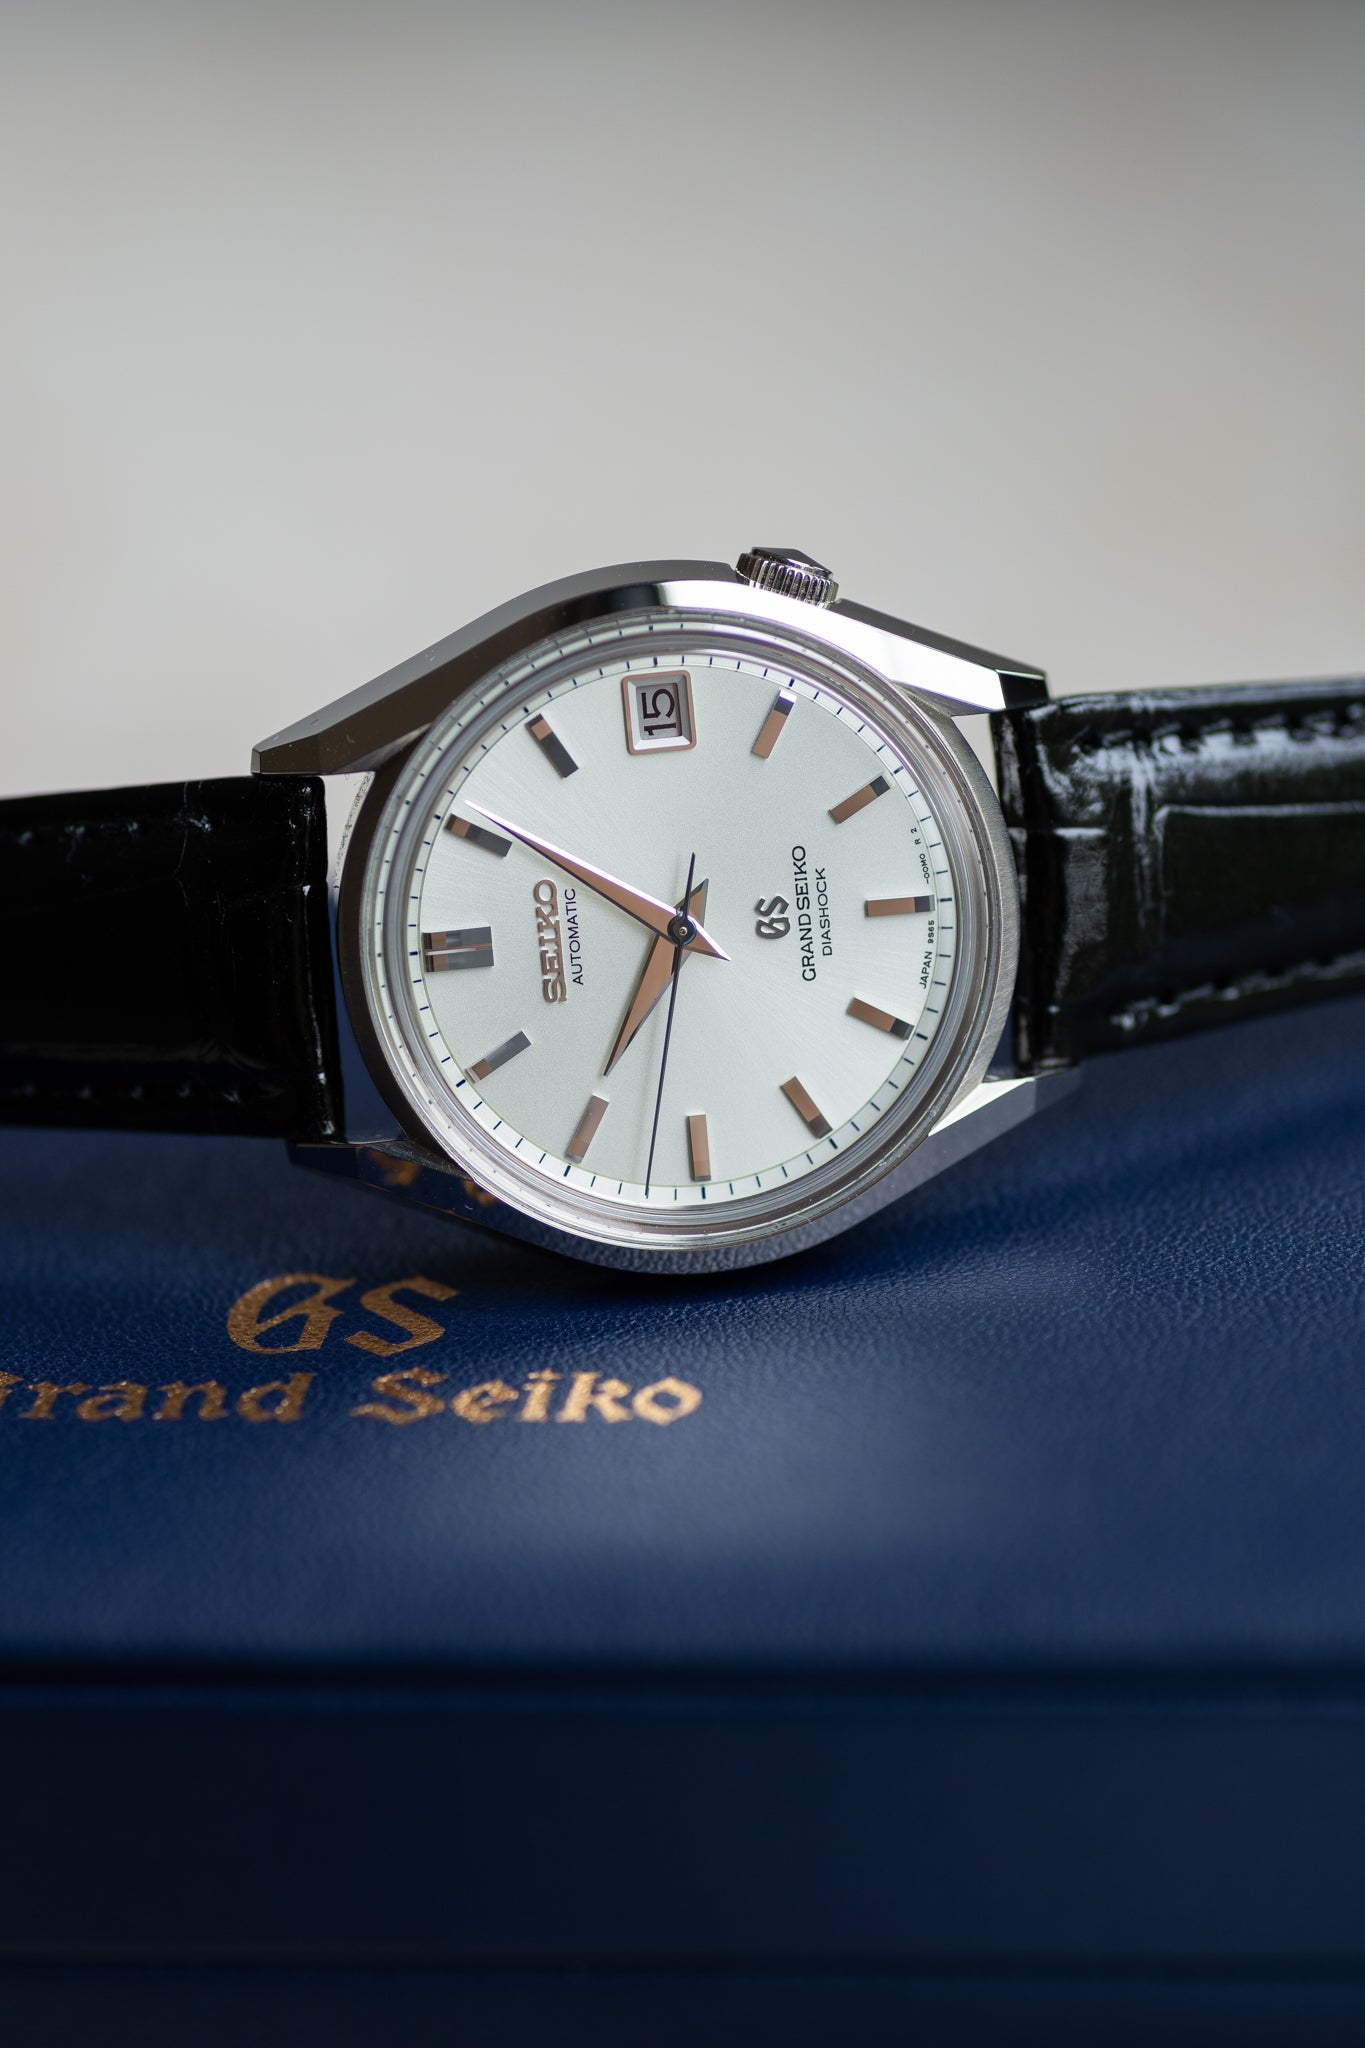 Grand Seiko SBGR091 in white gold - 62 GS reissue limited edition